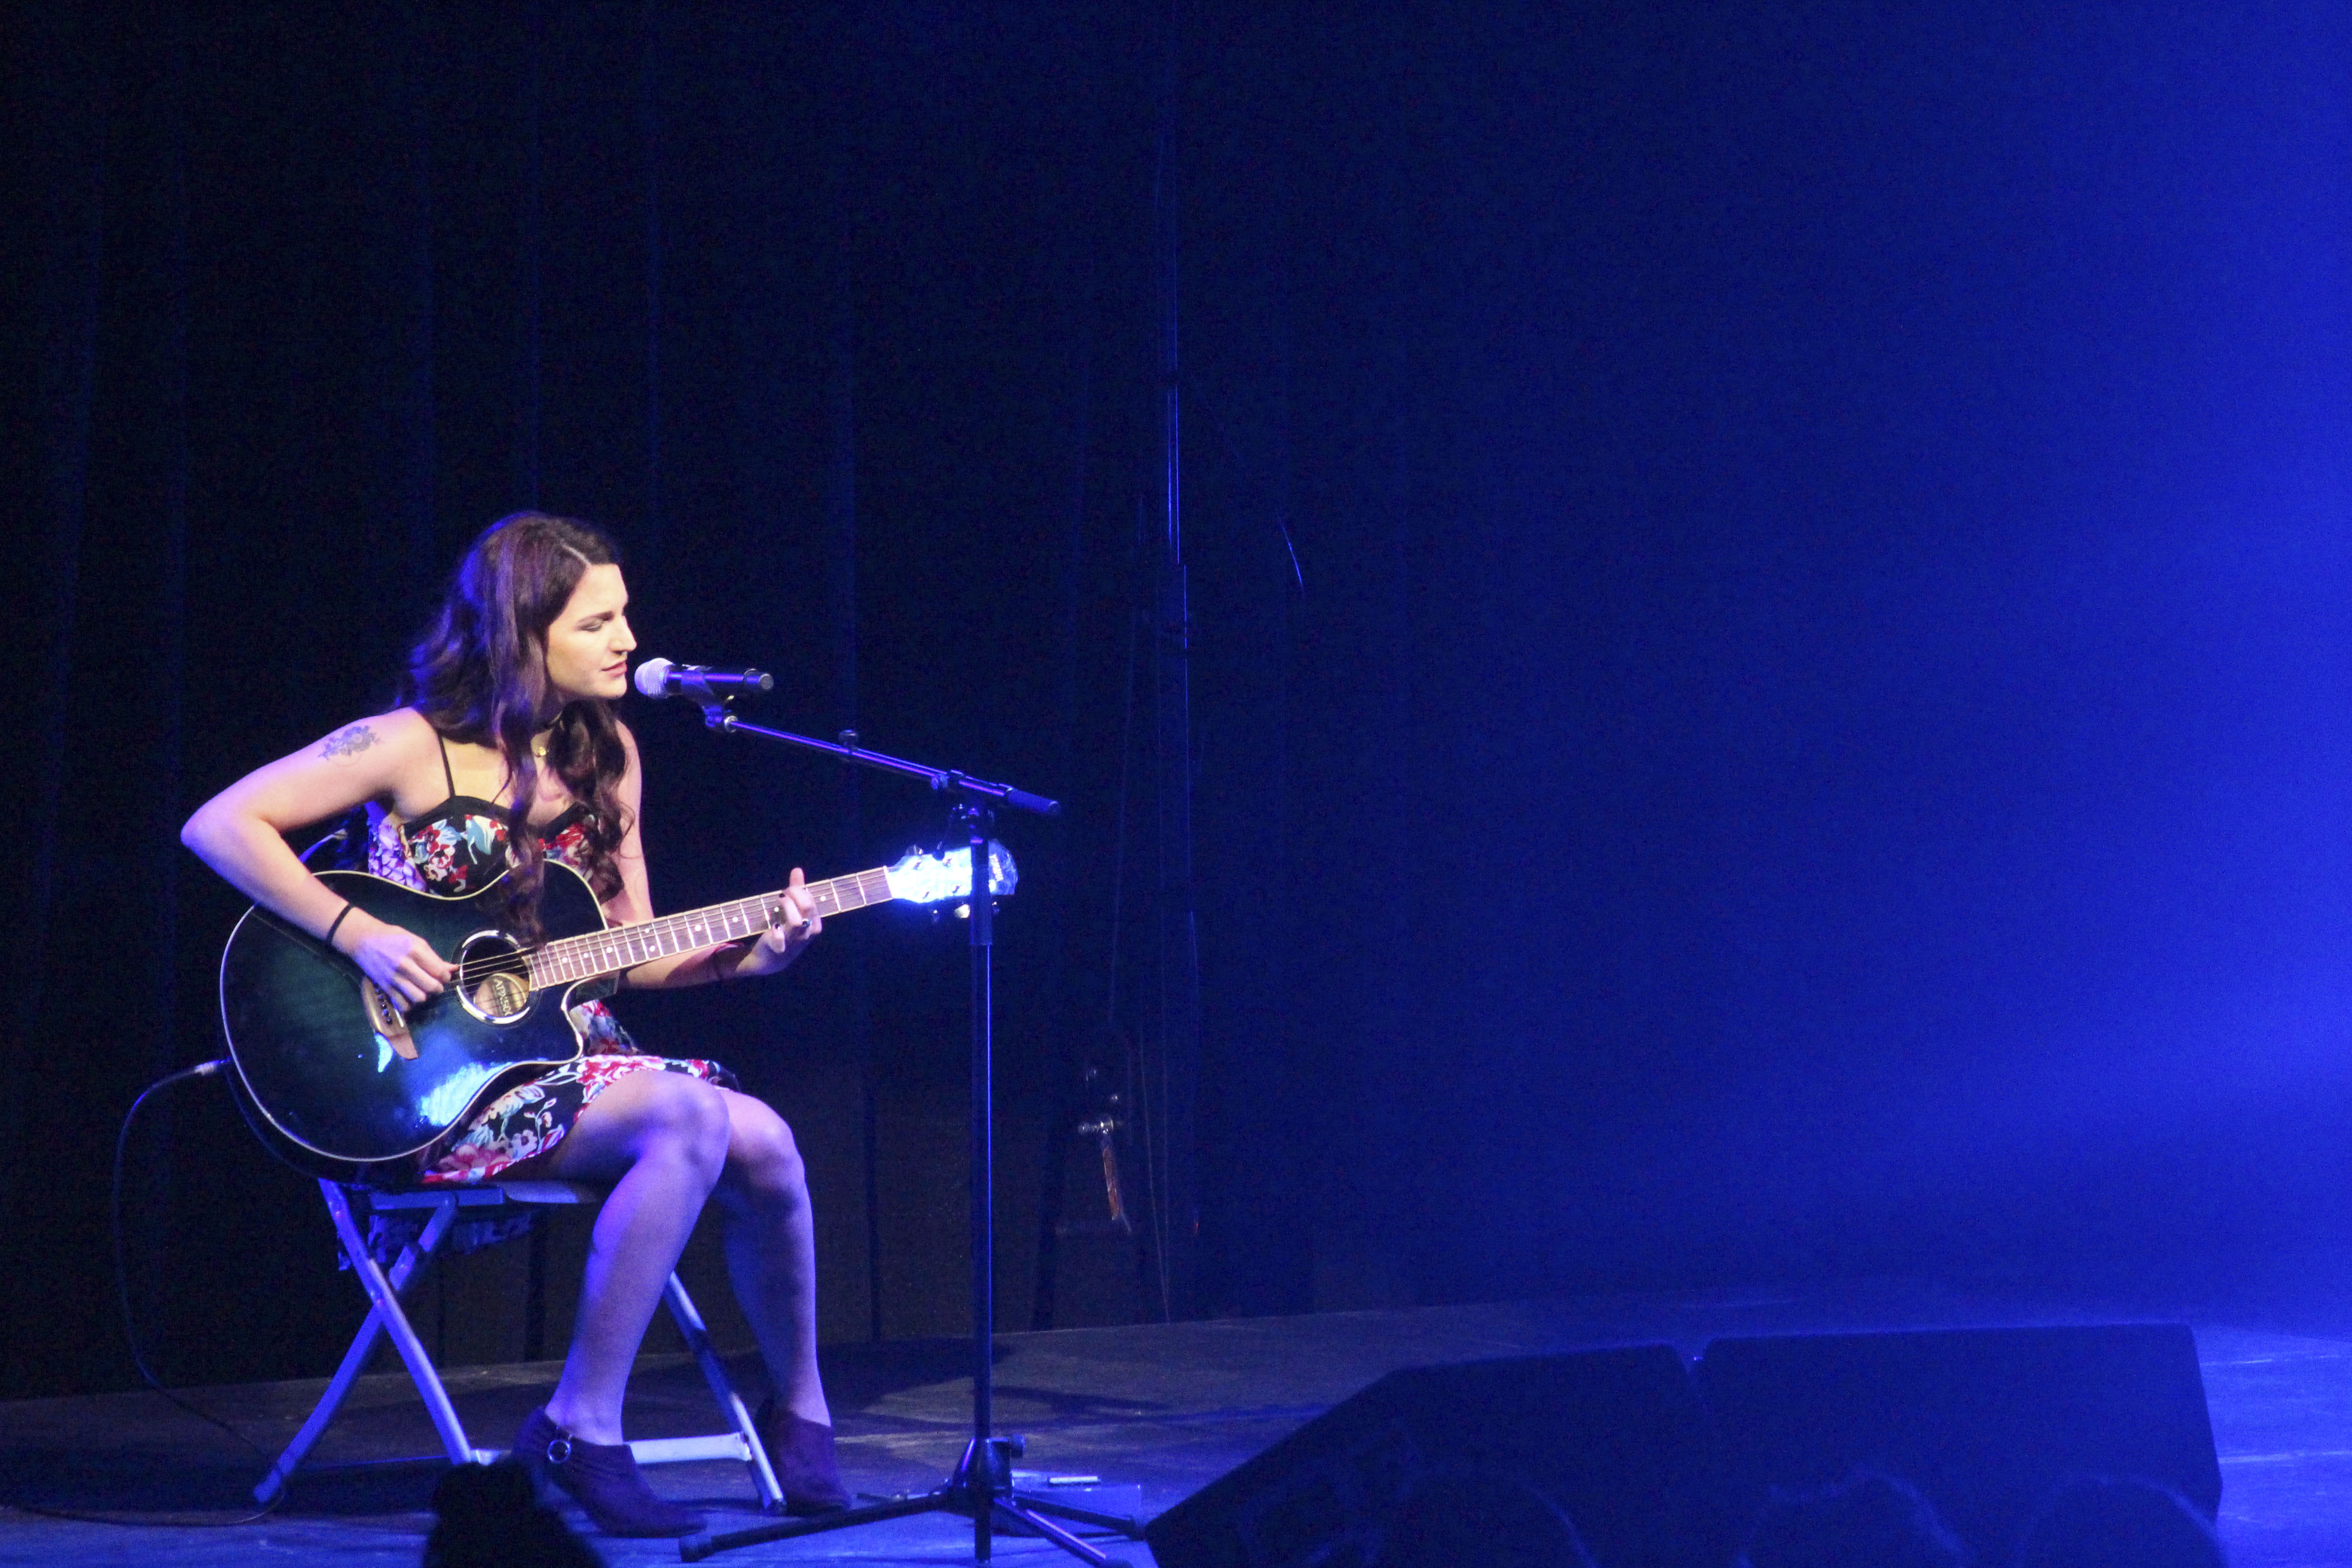 A student playing guitar on stage